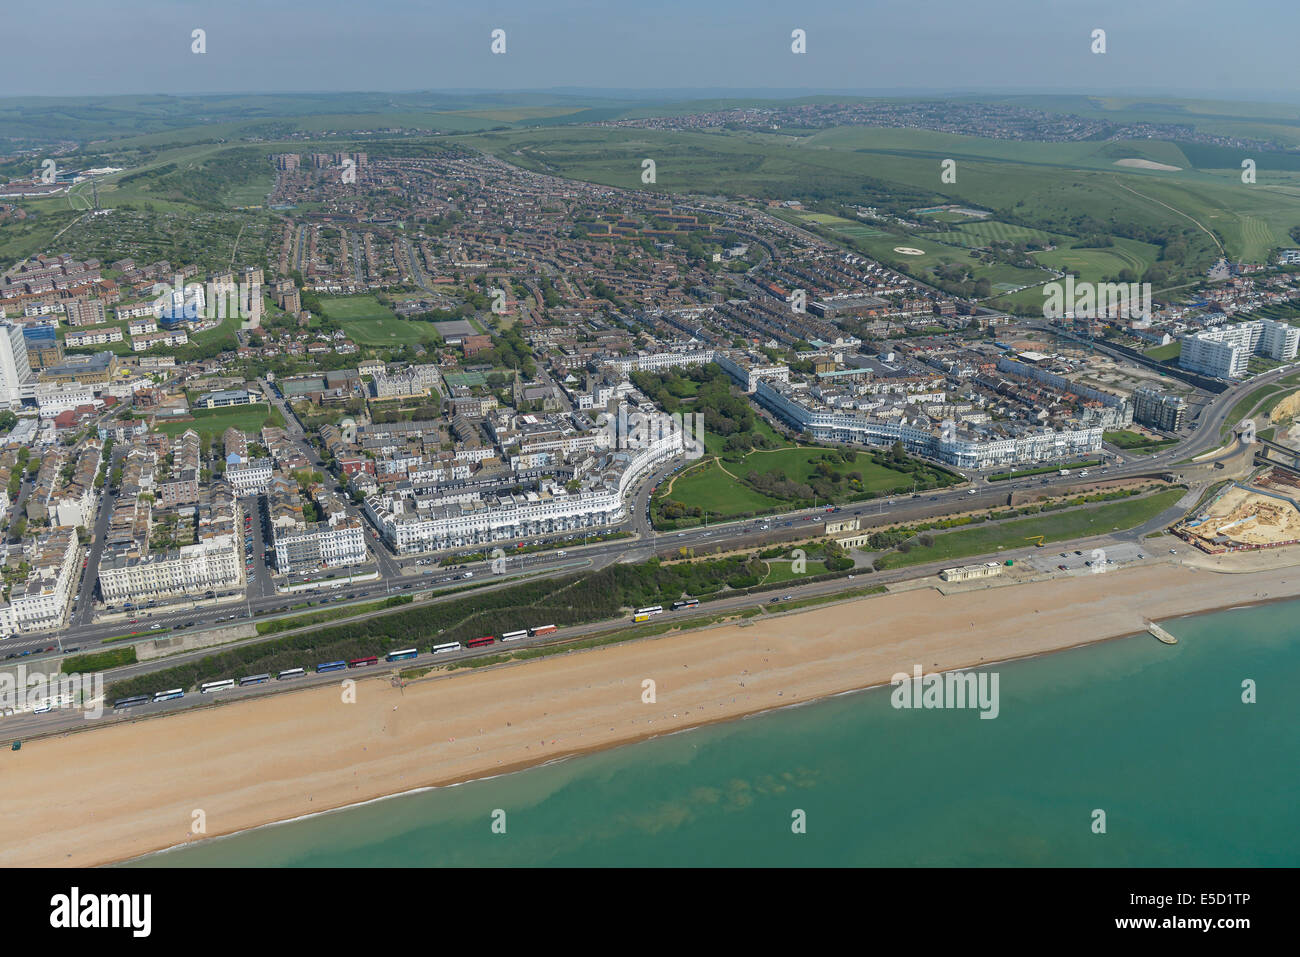 An aerial view looking from the coast to the Whitehawk area of Brighton, East Sussex, UK. Stock Photo